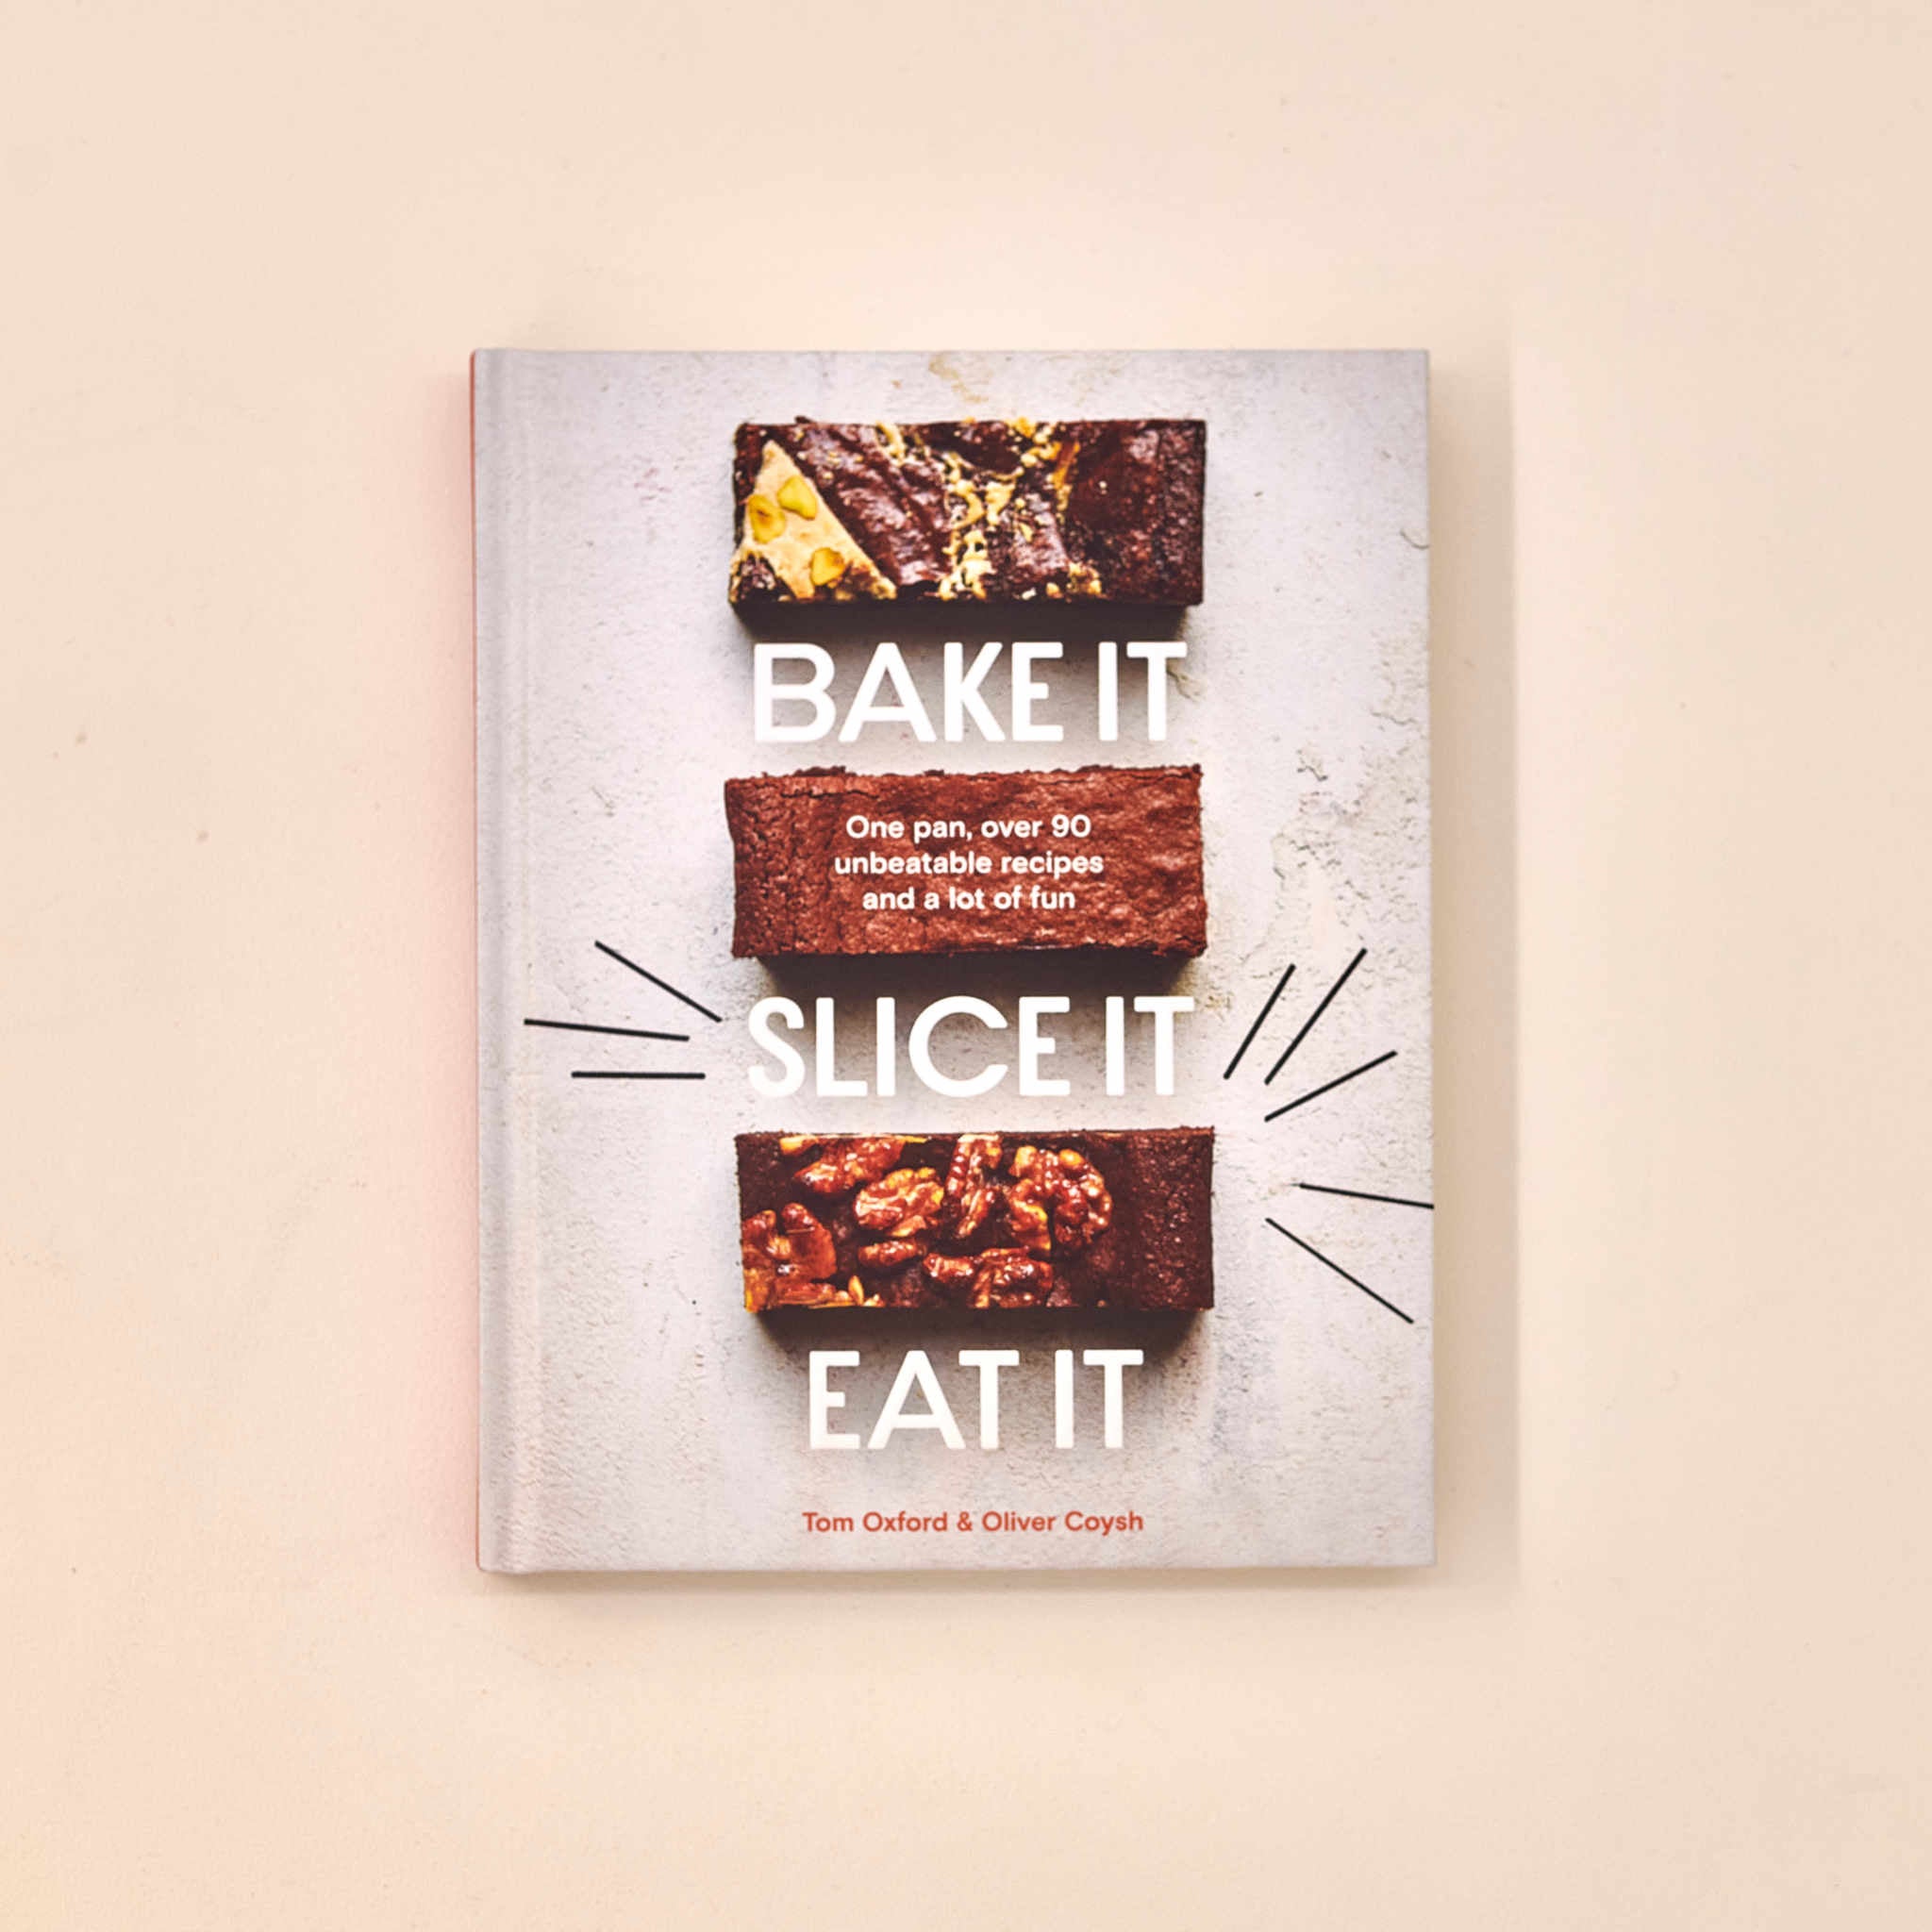 Further Away Angle Of Frontal View of Exploding Bakery Bake It Slice it Eat It Baking Book